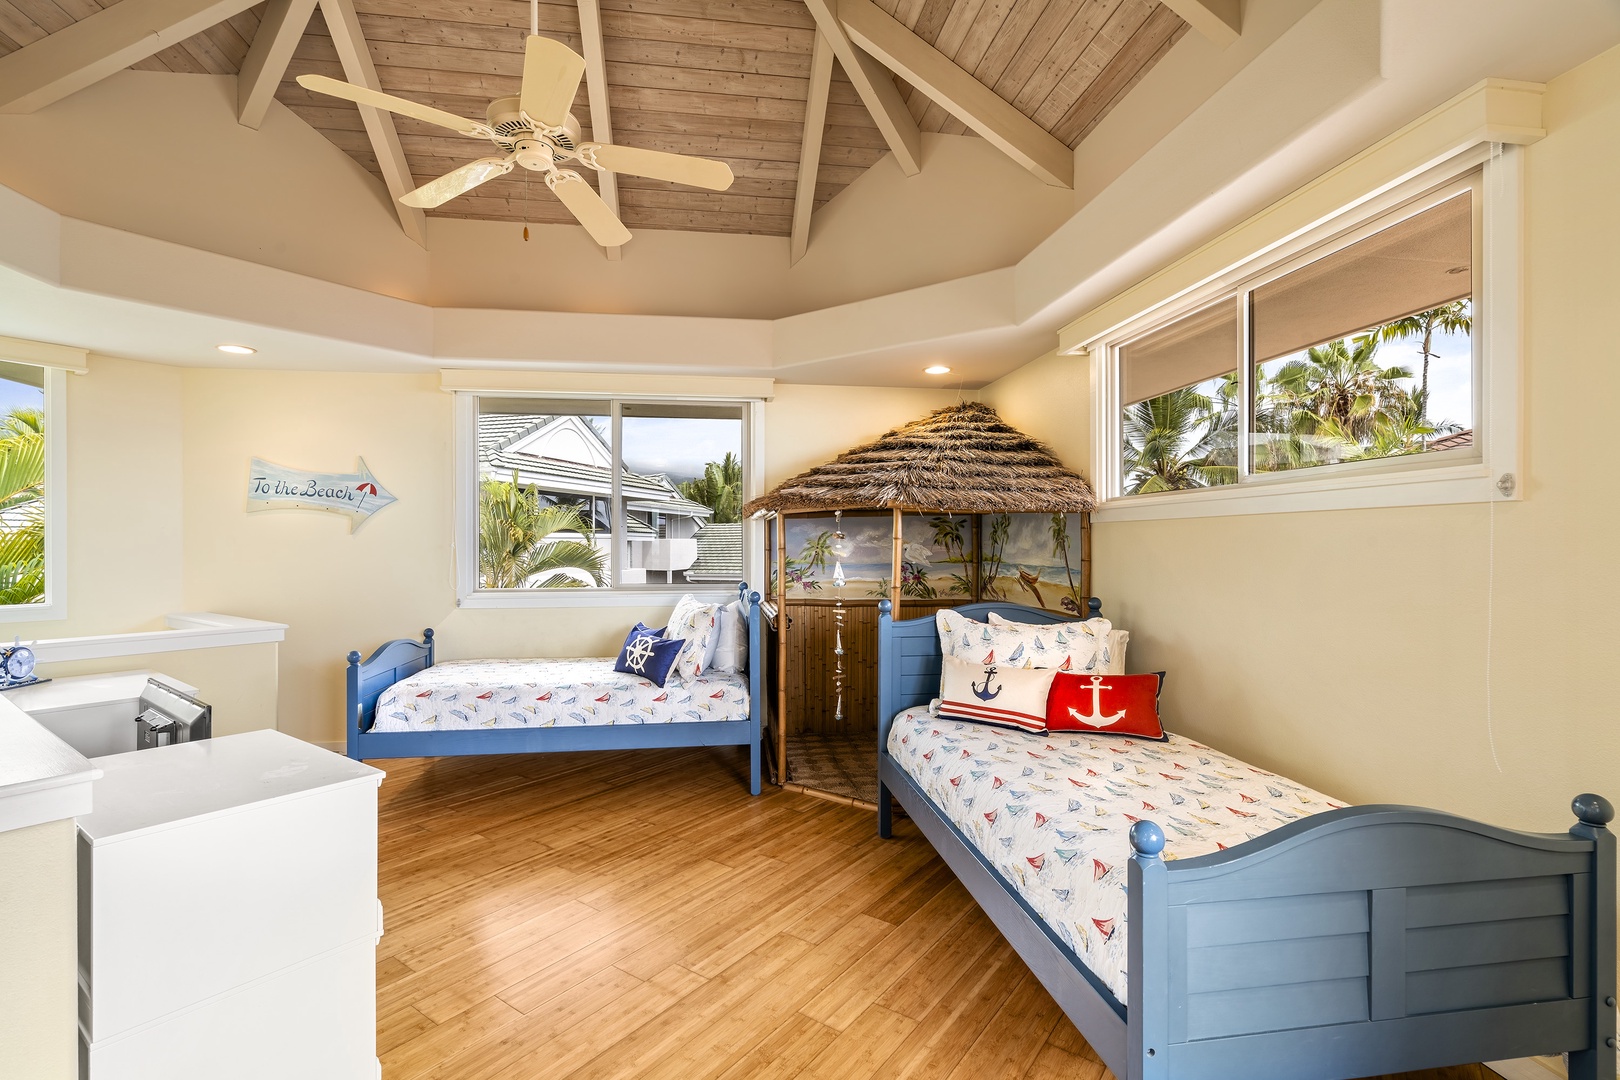 Kailua Kona Vacation Rentals, Ali'i Point #12 - Upstairs kids room equipped with 2 Twin beds!